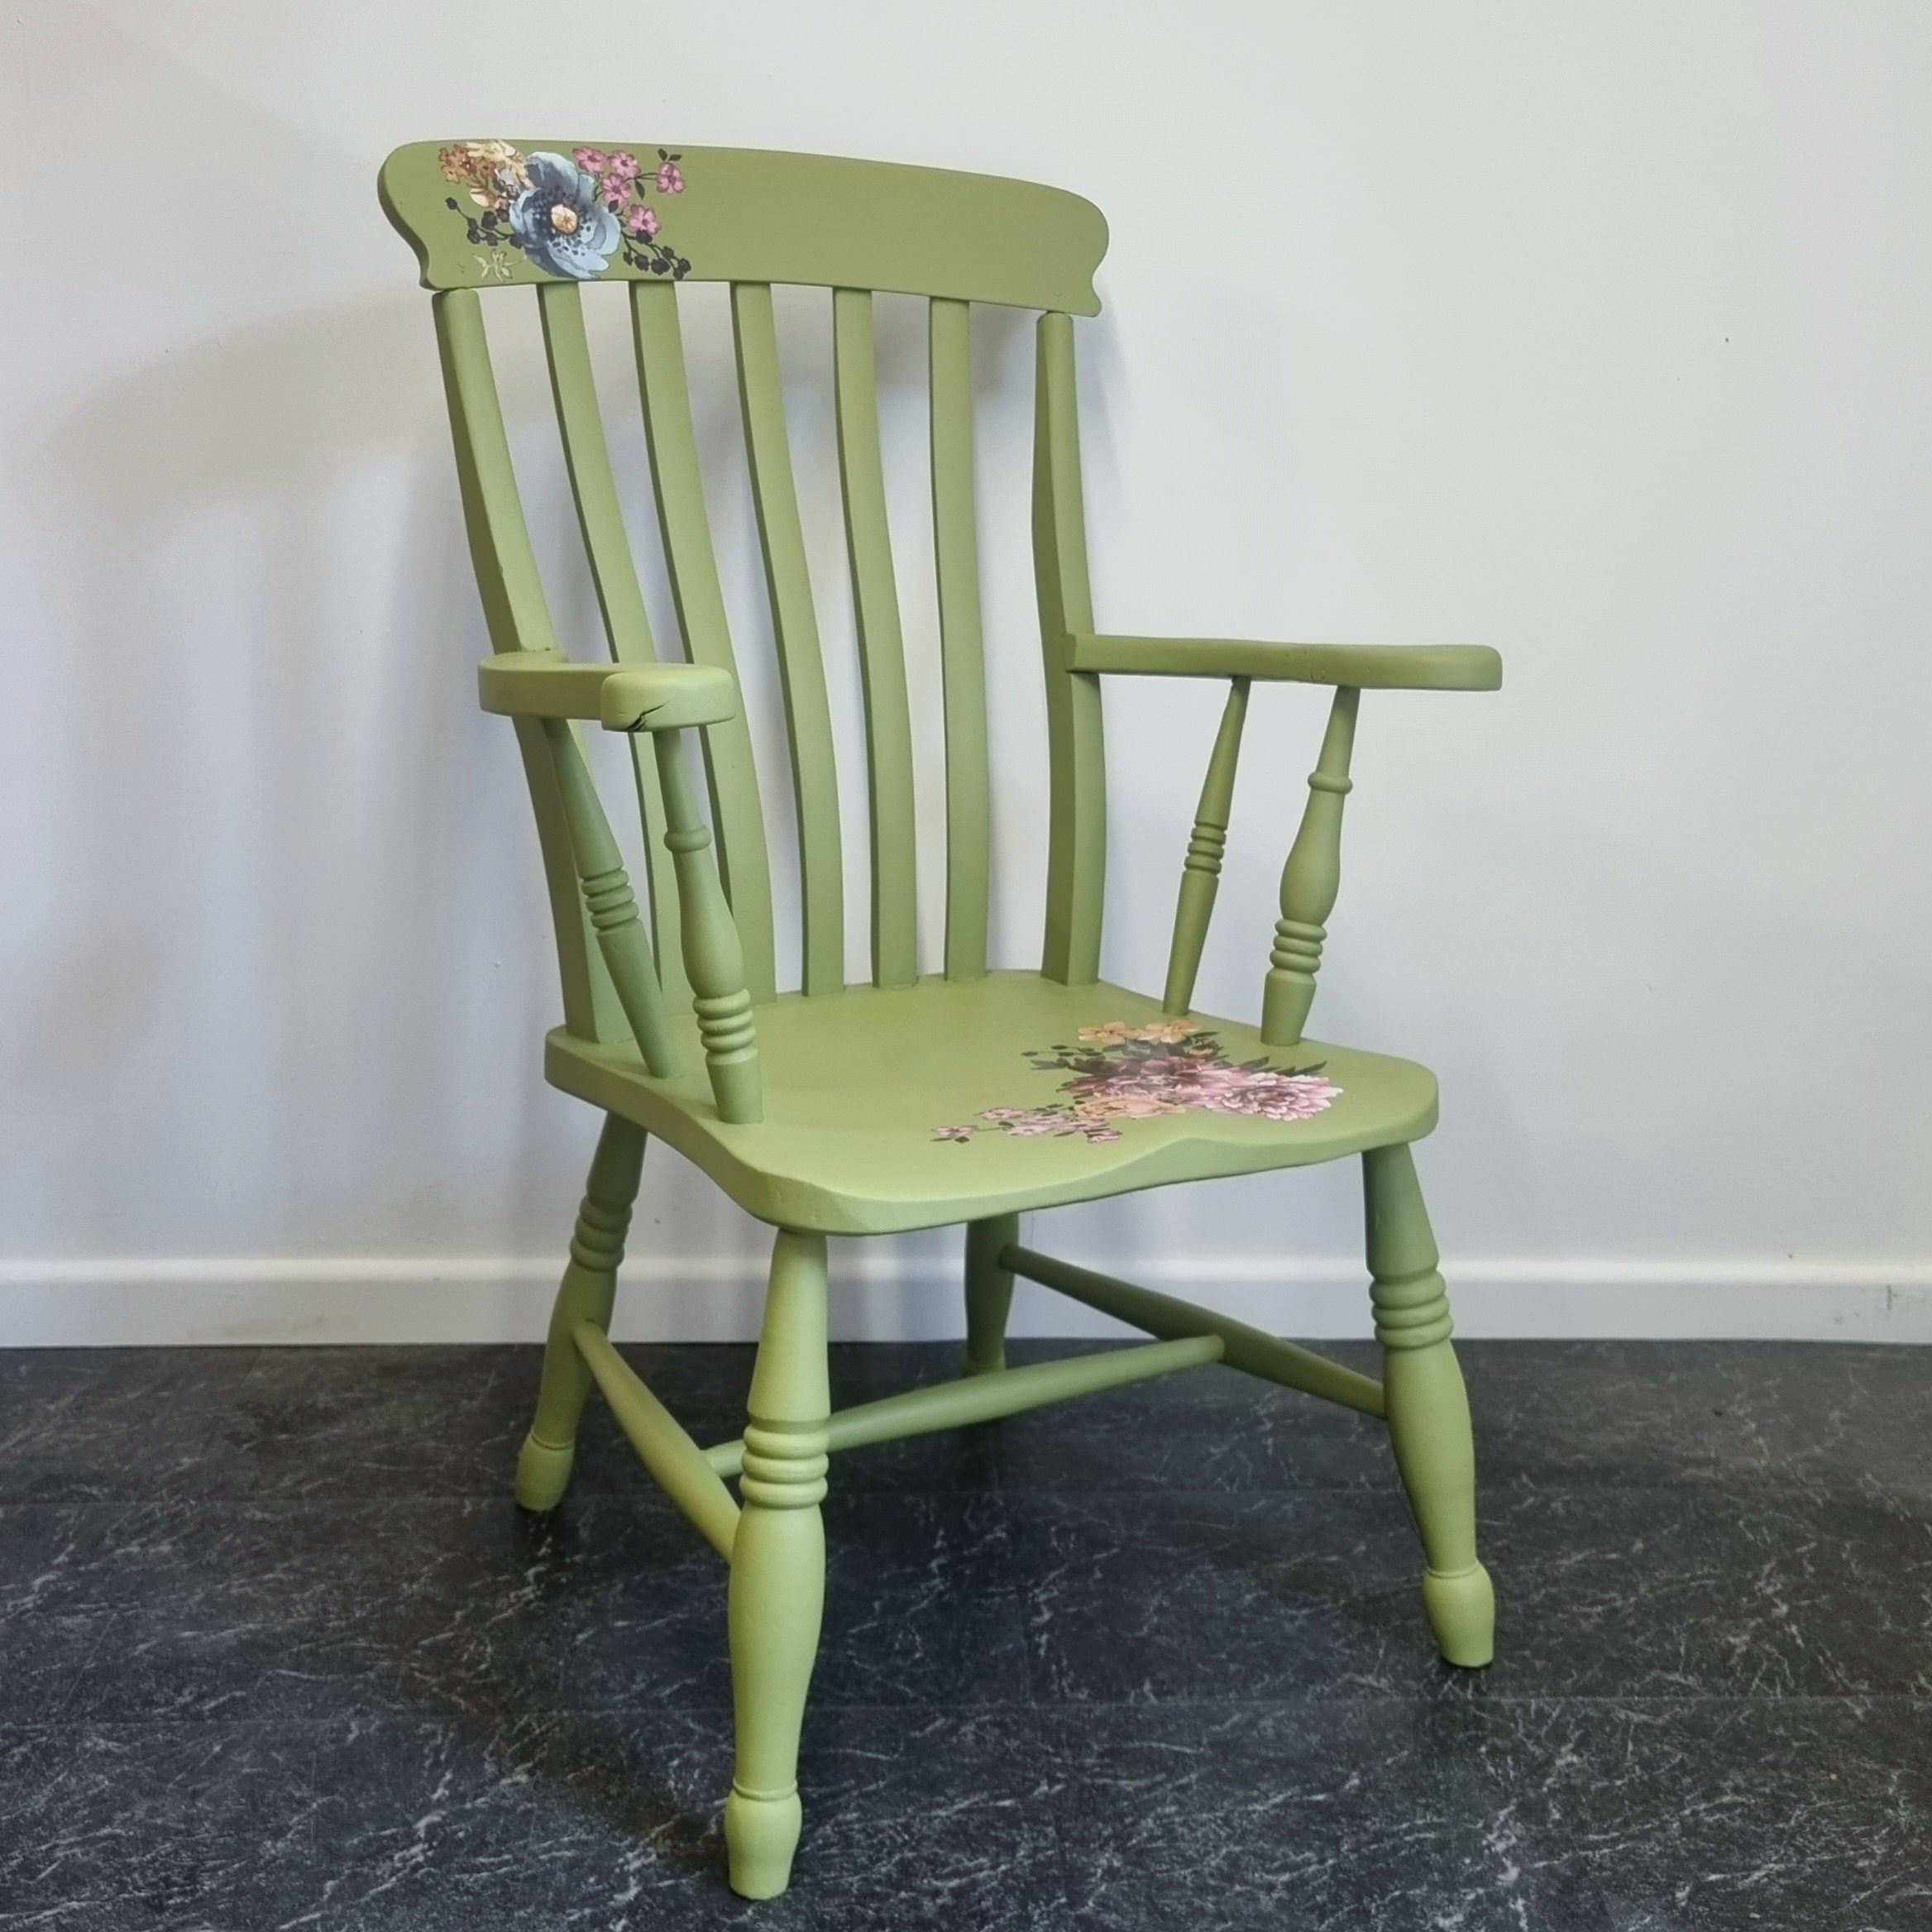 Green Chair with Roses